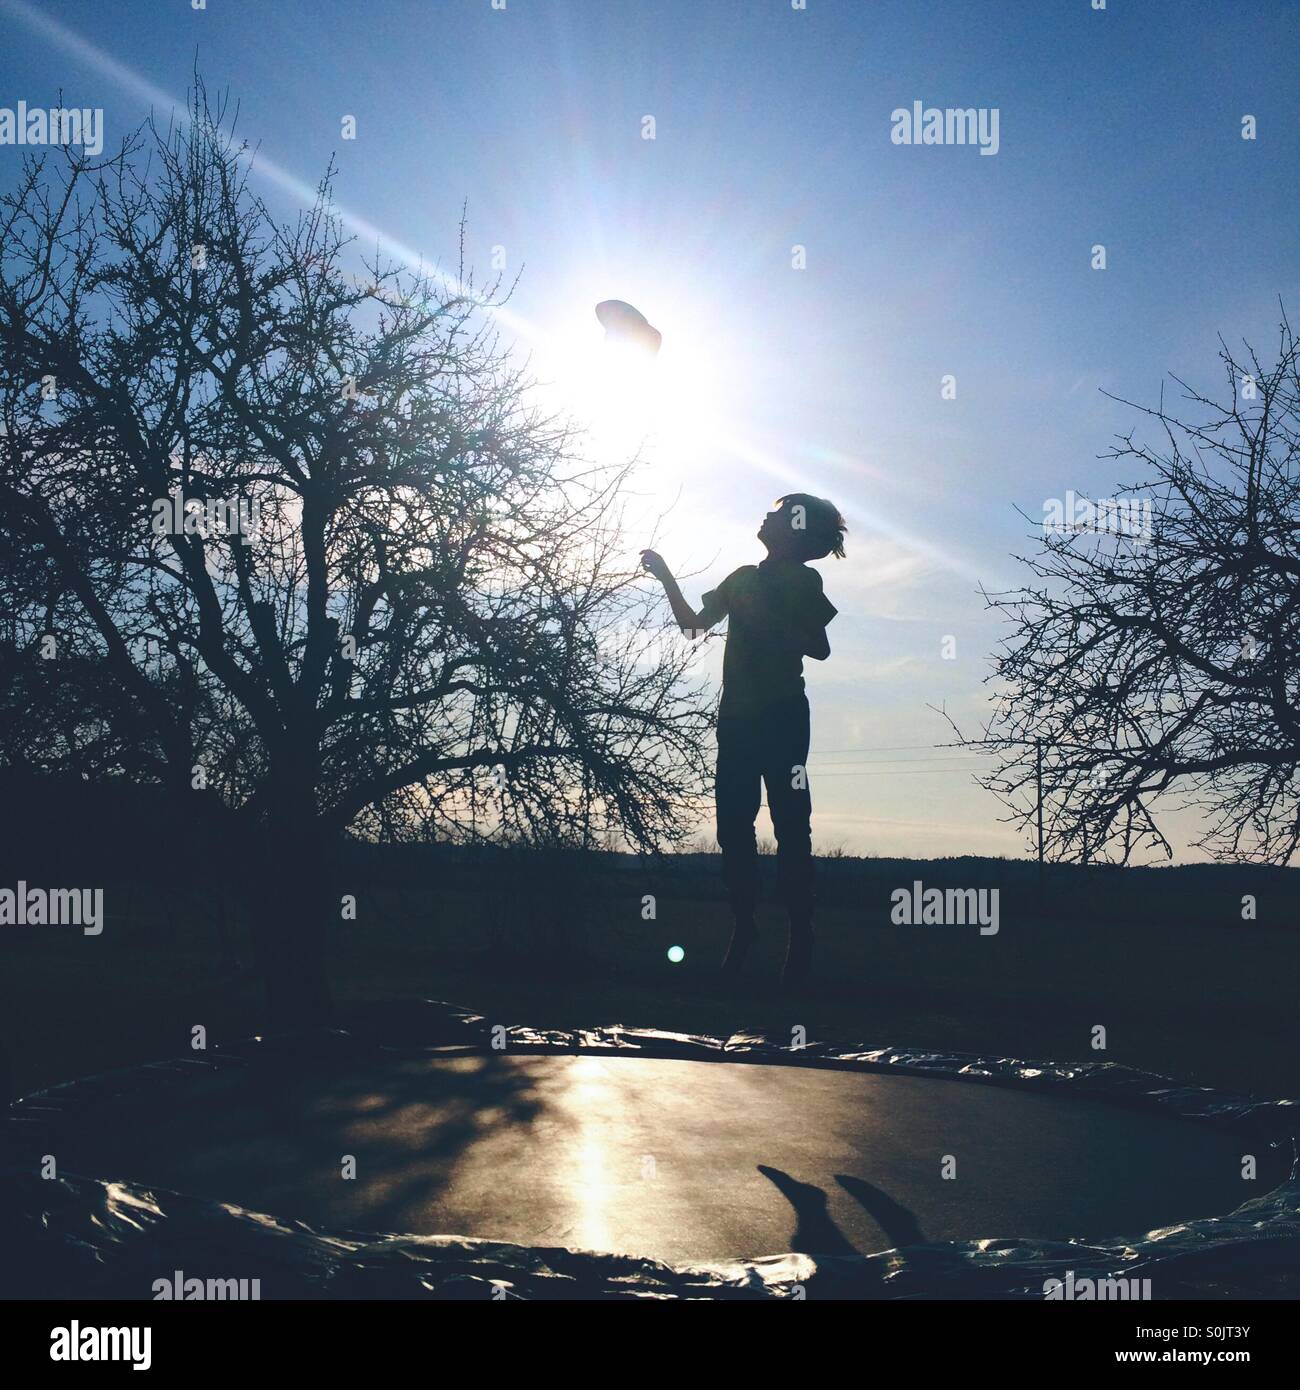 Silhouette of boy jumping on a trampoline, throwing his cap in the air Stock Photo